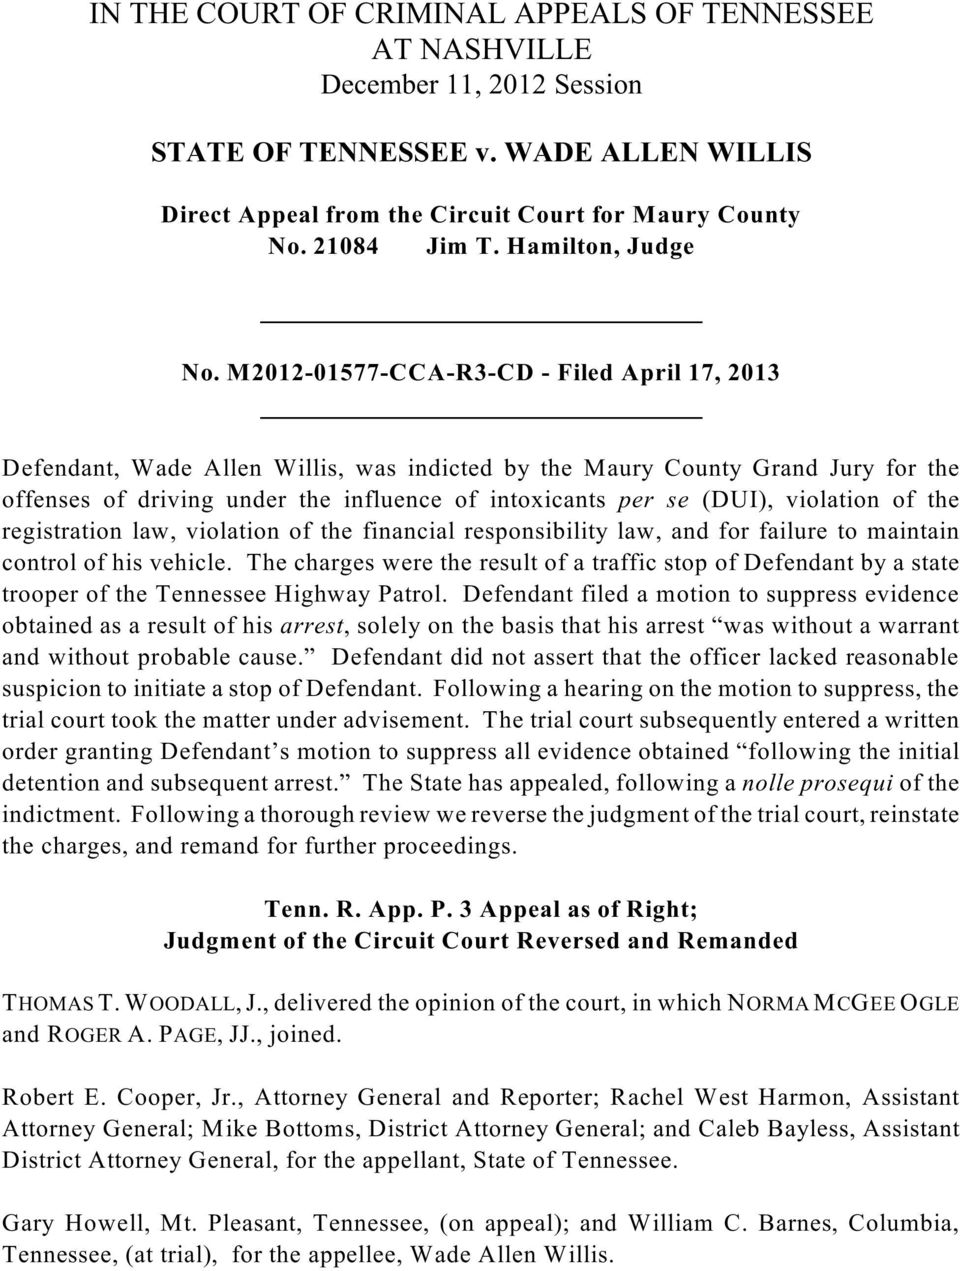 M2012-01577-CCA-R3-CD - Filed April 17, 2013 Defendant, Wade Allen Willis, was indicted by the Maury County Grand Jury for the offenses of driving under the influence of intoxicants per se (DUI),